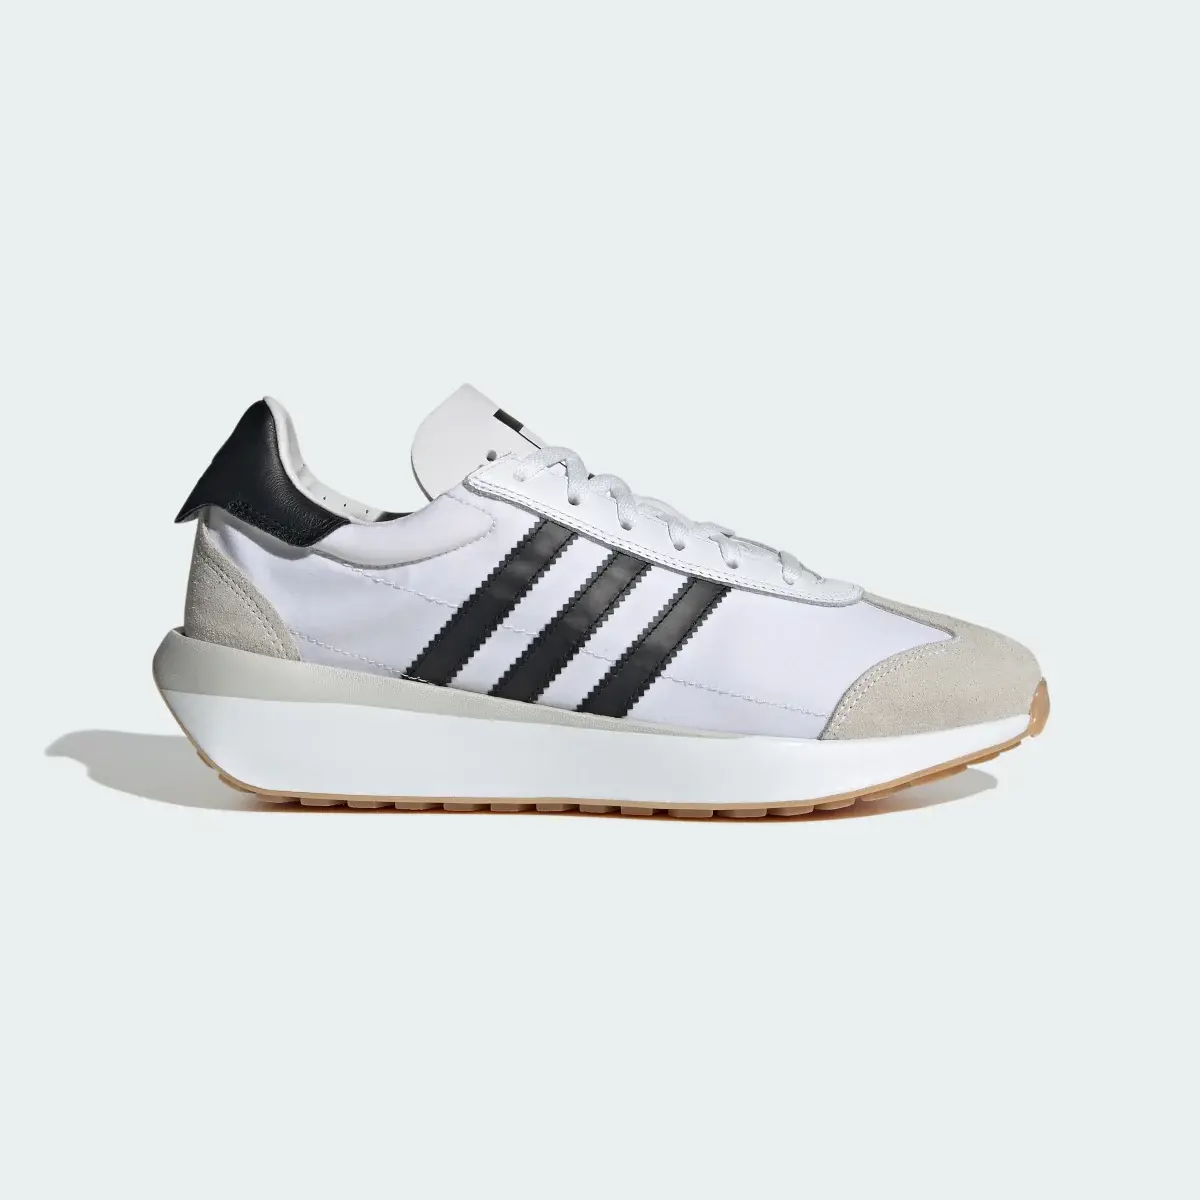 Adidas Chaussure Country XLG. 2